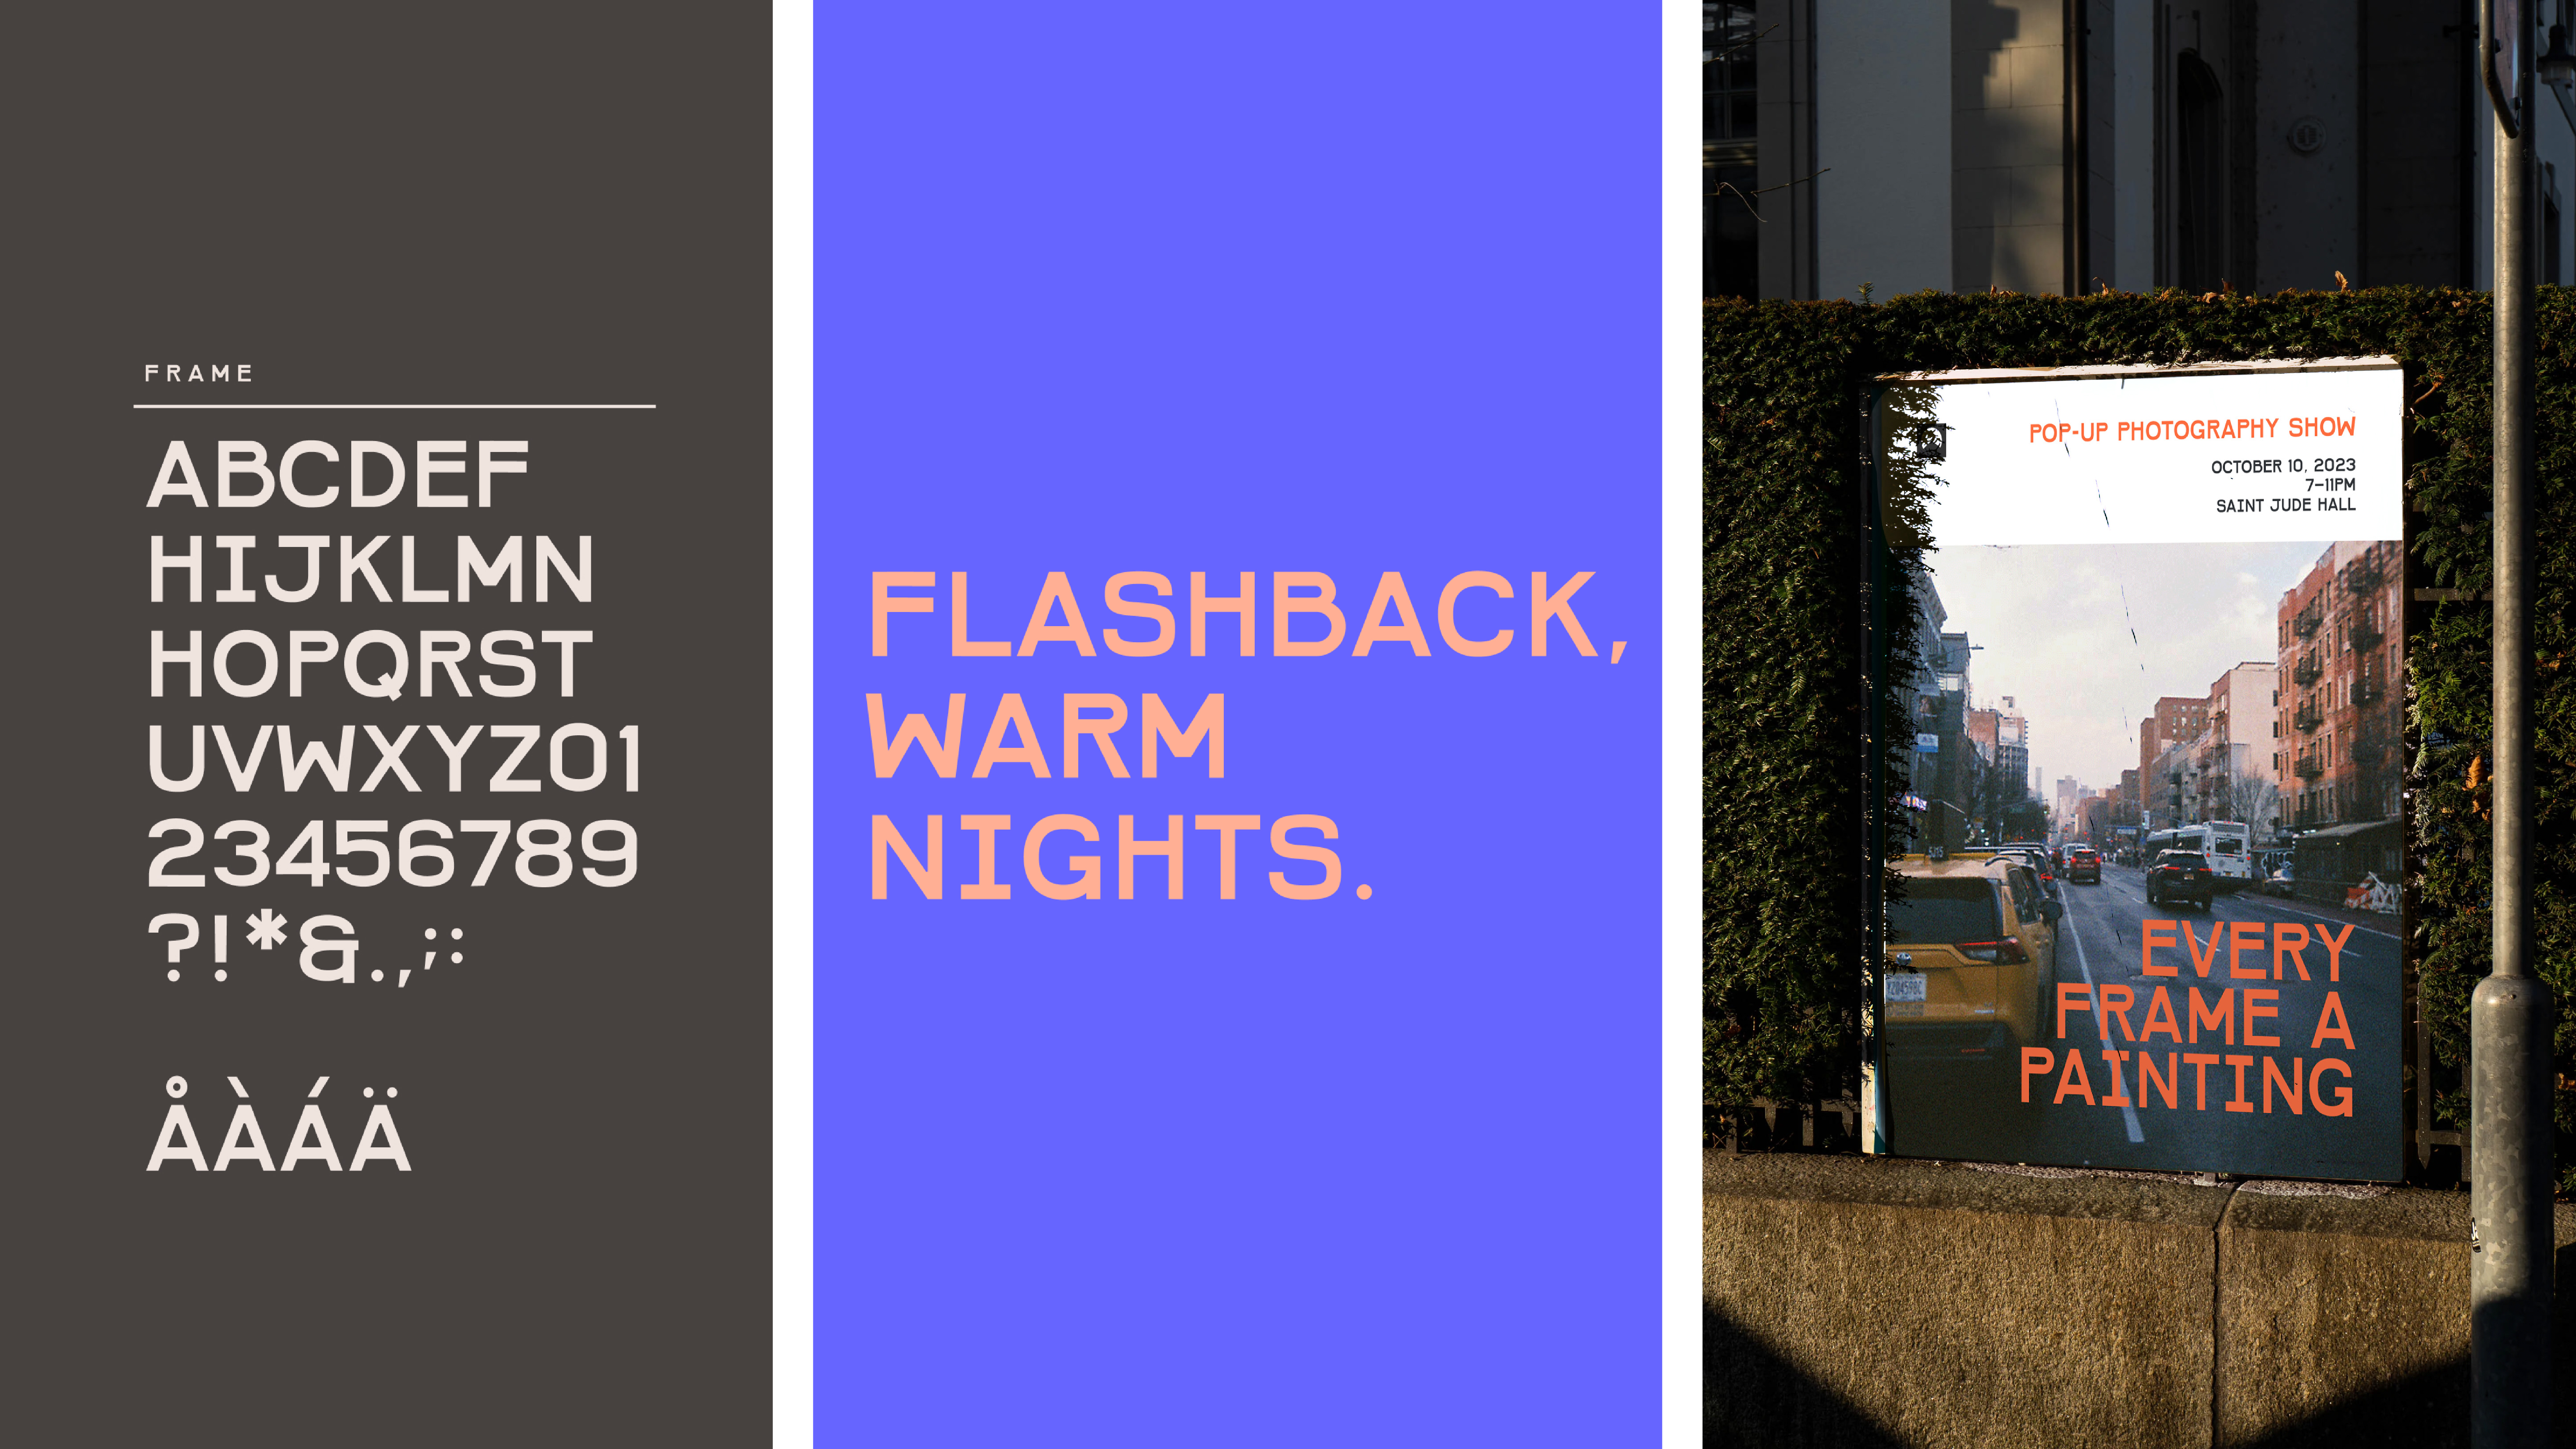 Letters and symbols arrange on a dark brown background next to a purple section with the words flashback, warm nights on it next to a poster mockup of photography with text on it.